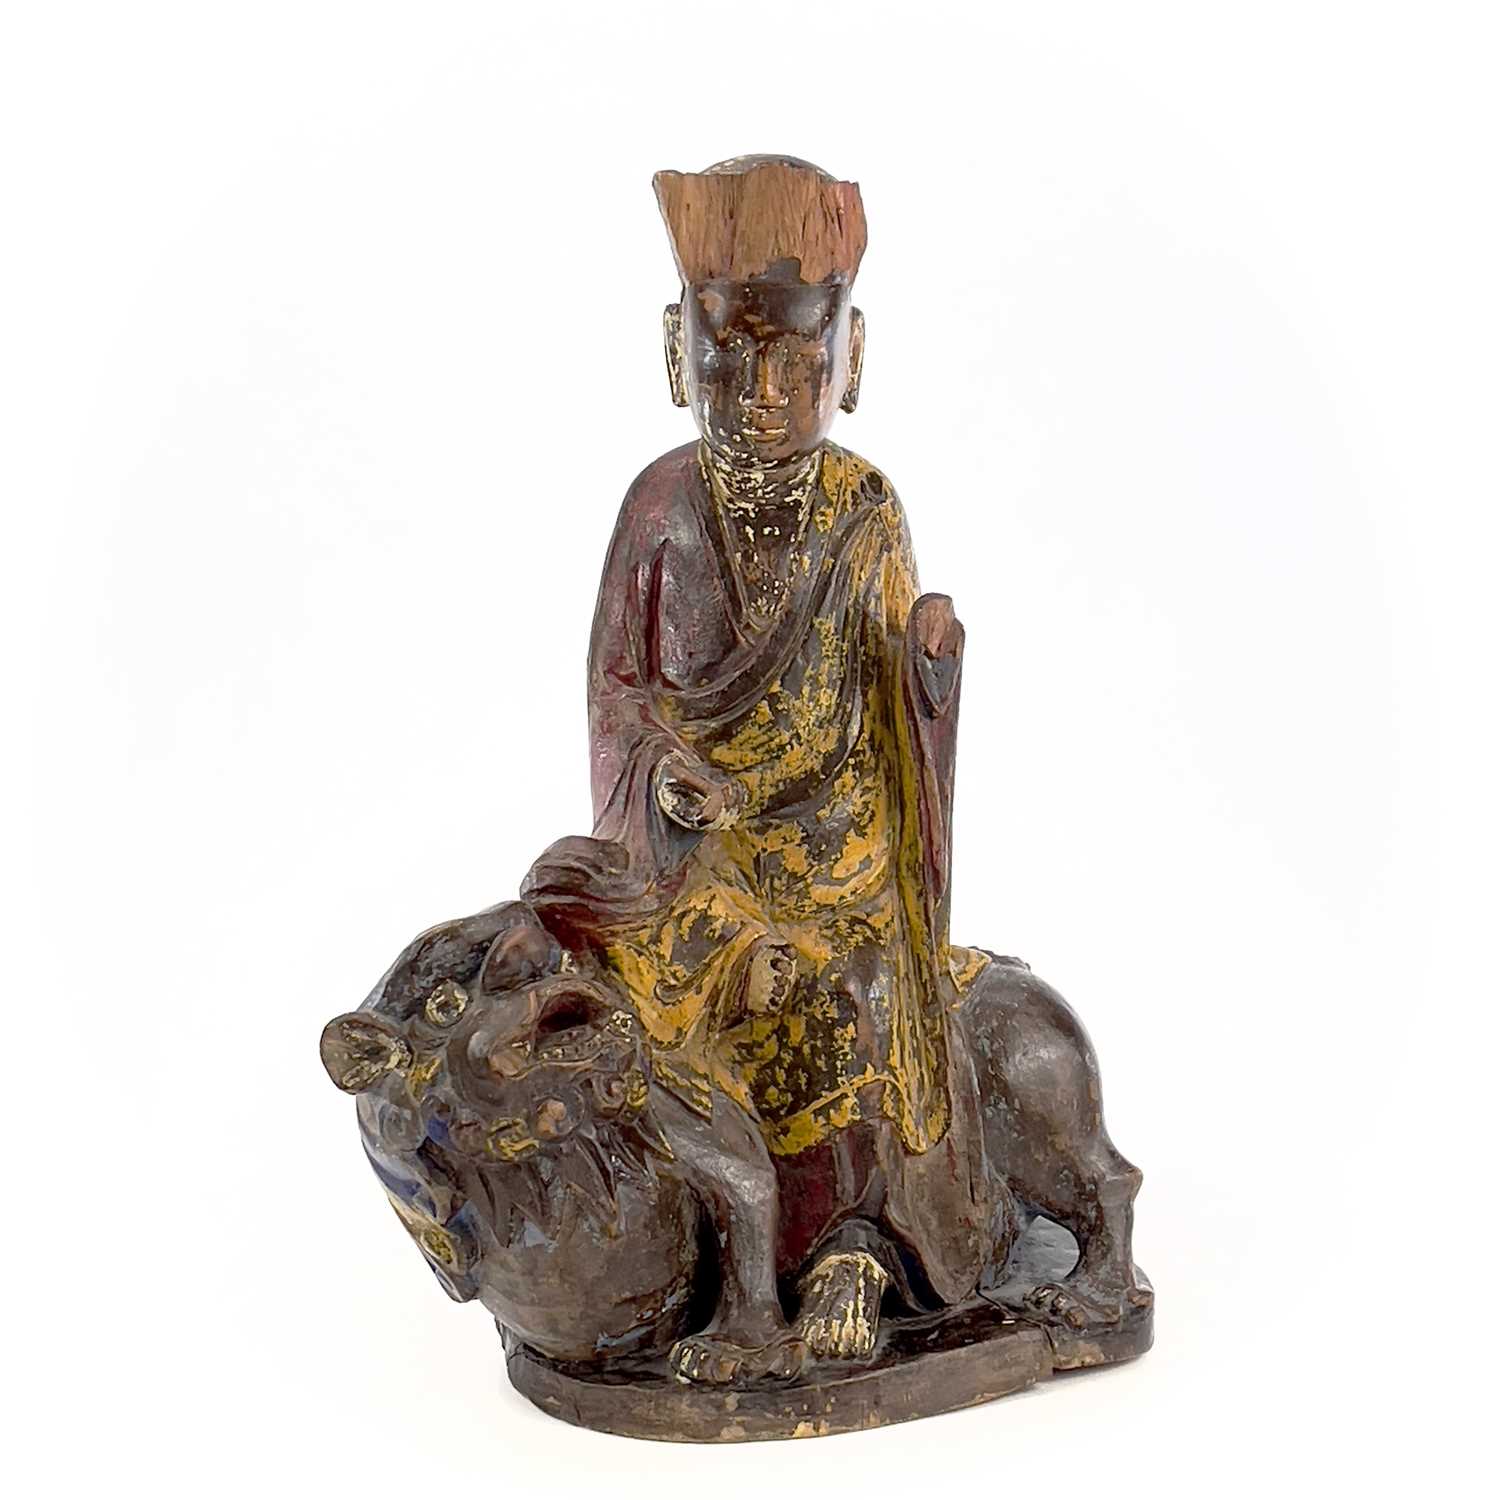 A Chinese carved and painted figure, 19th century, seated in robes wearing a high crown and riding a - Image 10 of 11